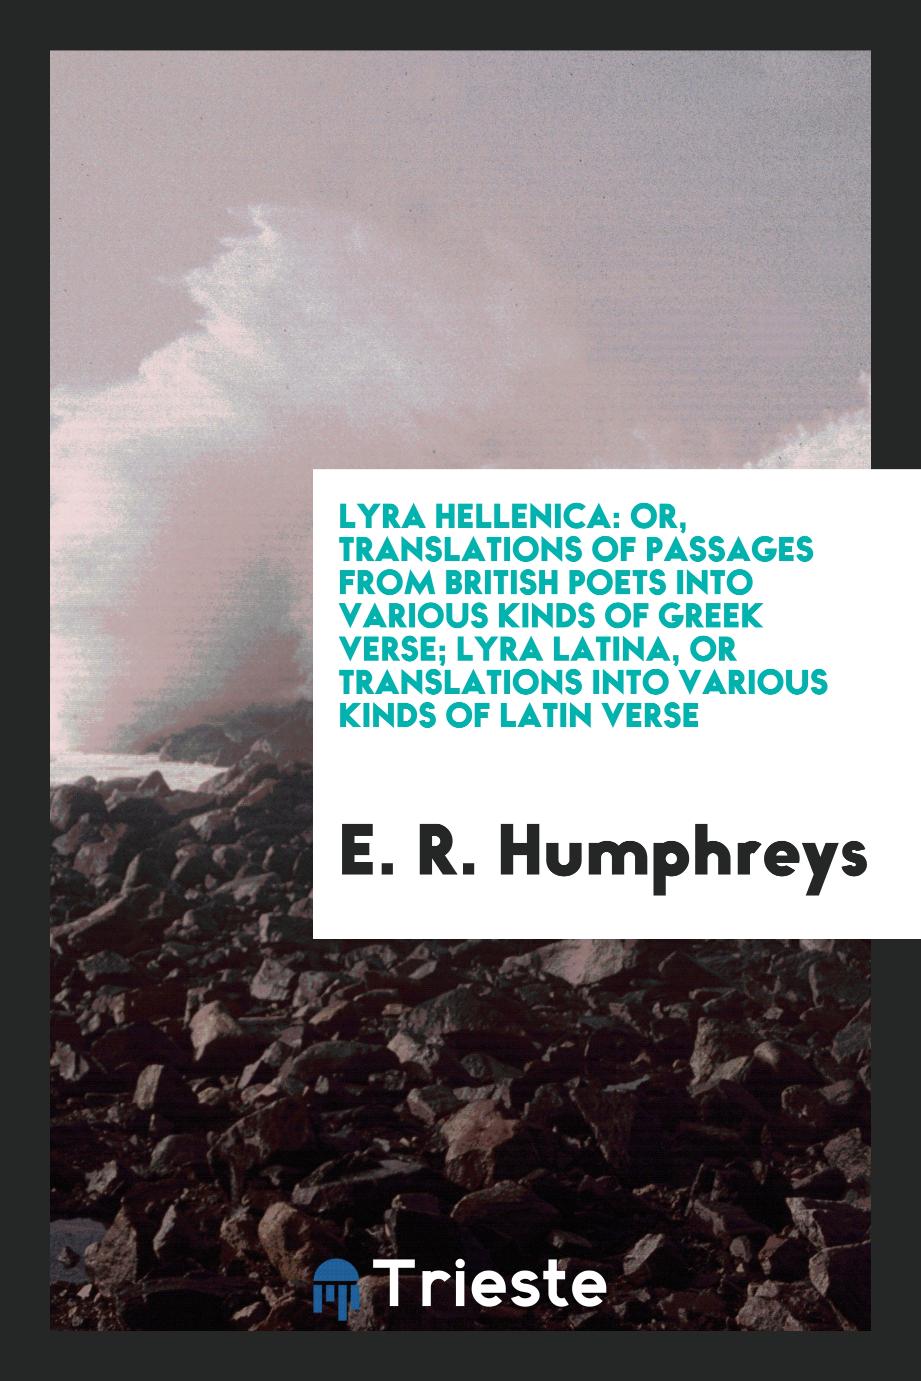 Lyra Hellenica: Or, Translations of Passages from British Poets into Various Kinds of Greek Verse; Lyra Latina, or Translations into Various Kinds of Latin Verse